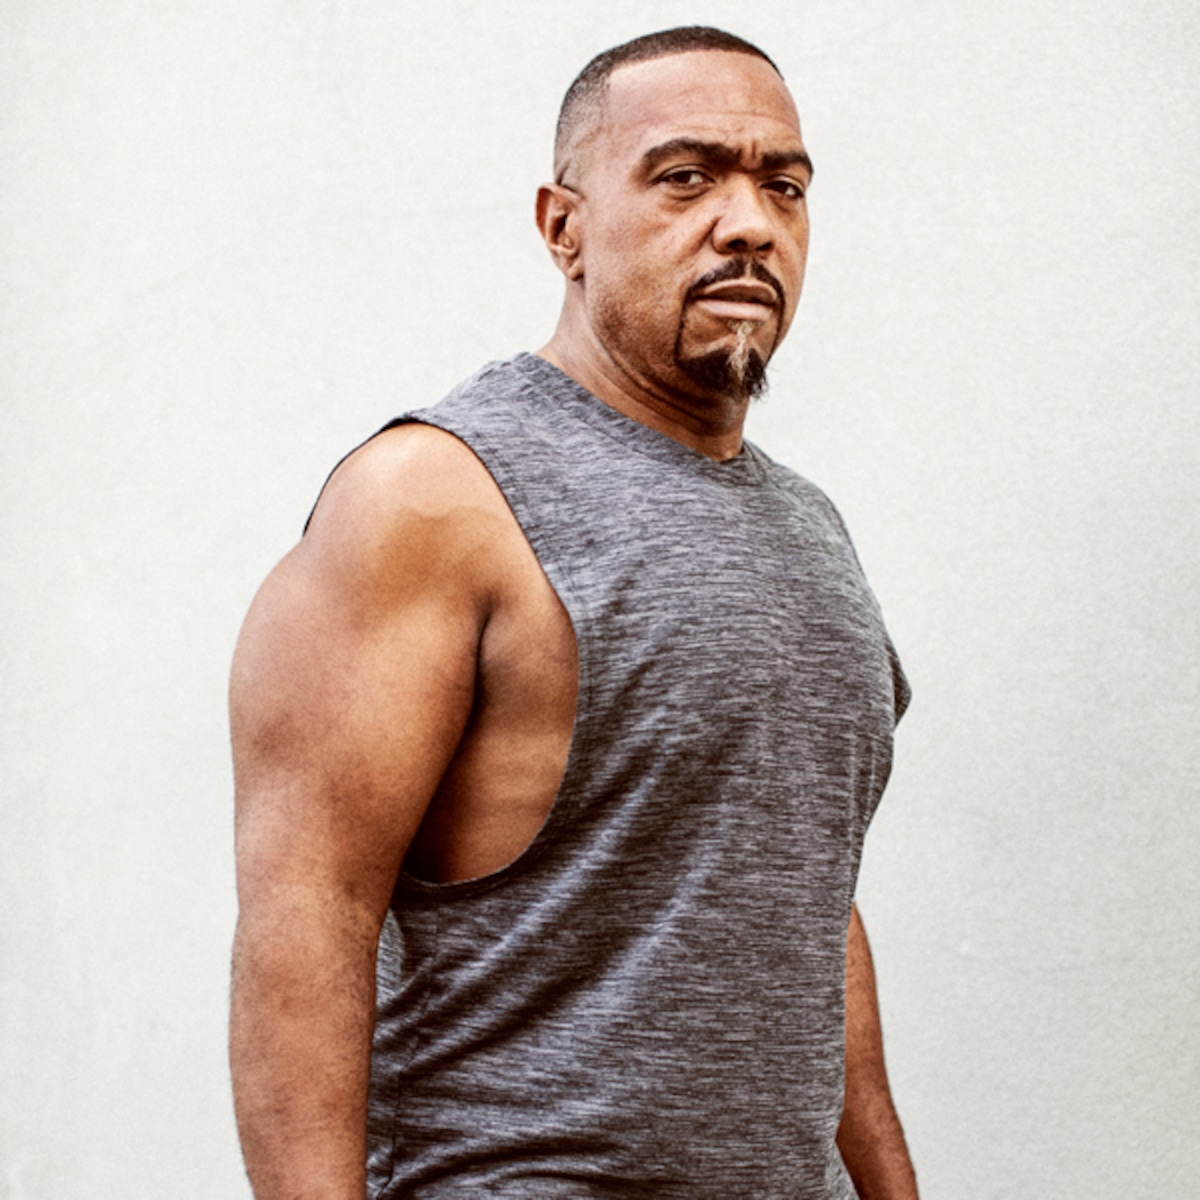 chorro administración papi How Timbaland Lost 130 Pounds After Near-Death Nightmare - E! Online